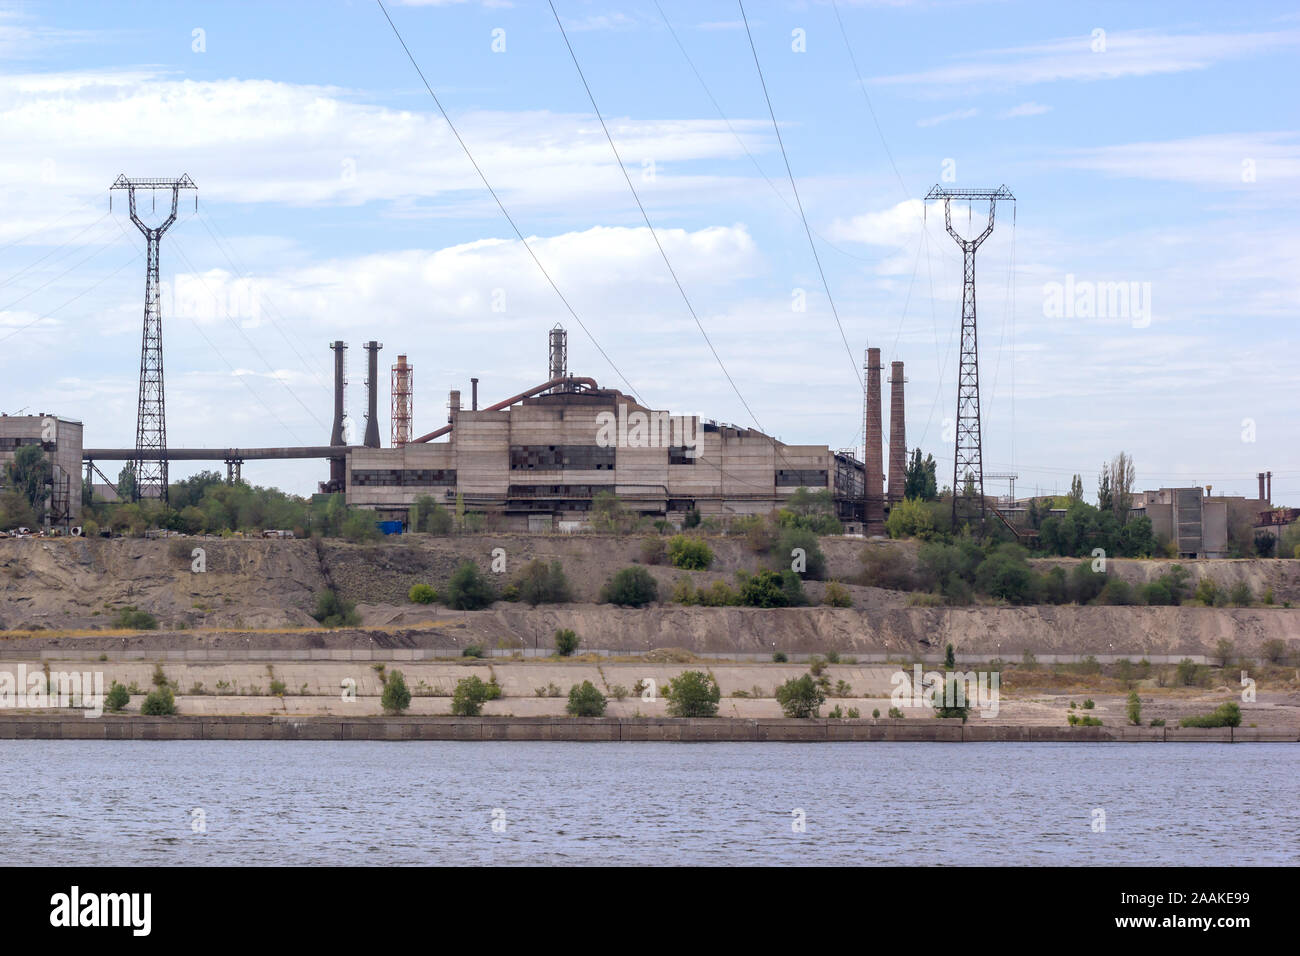 Panoramic view of ironworks located on the river coastline. Industrial landscape. Stock Photo